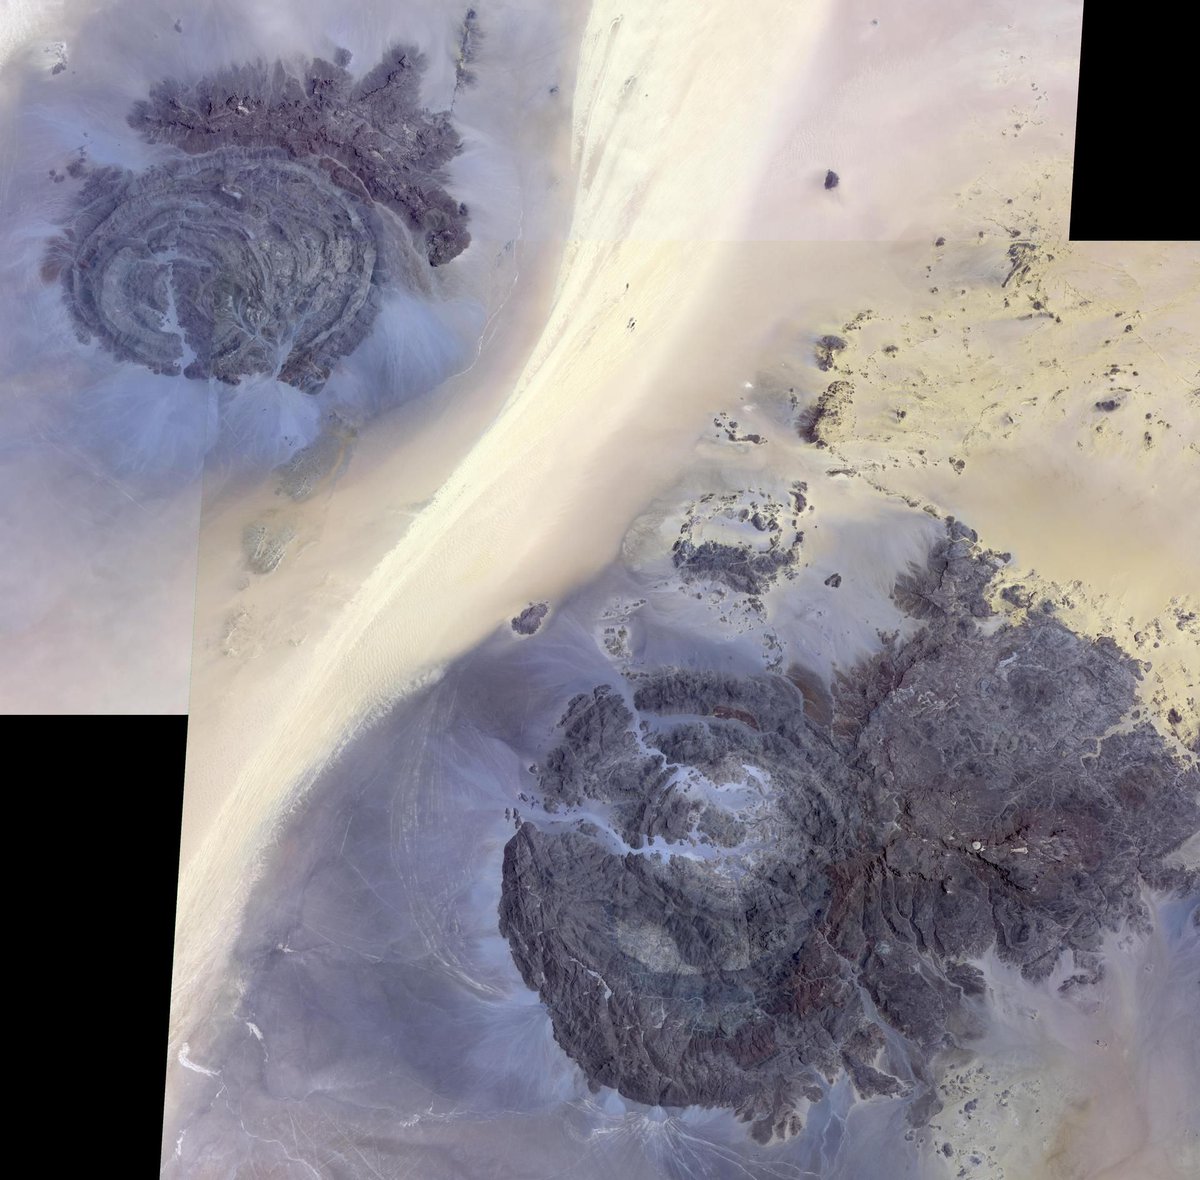 #PPOD: In the southeast corner of Libya, in the Libyan Desert, lie the uplifted massifs of Jebel Awenat and Jebel Arkenu. Both expose ancient Precambrian rocks, intruded by granites, and overlain with sandstones. Credit: @NASA METI/AIST/Japan Space Systems, and ASTER Science Team